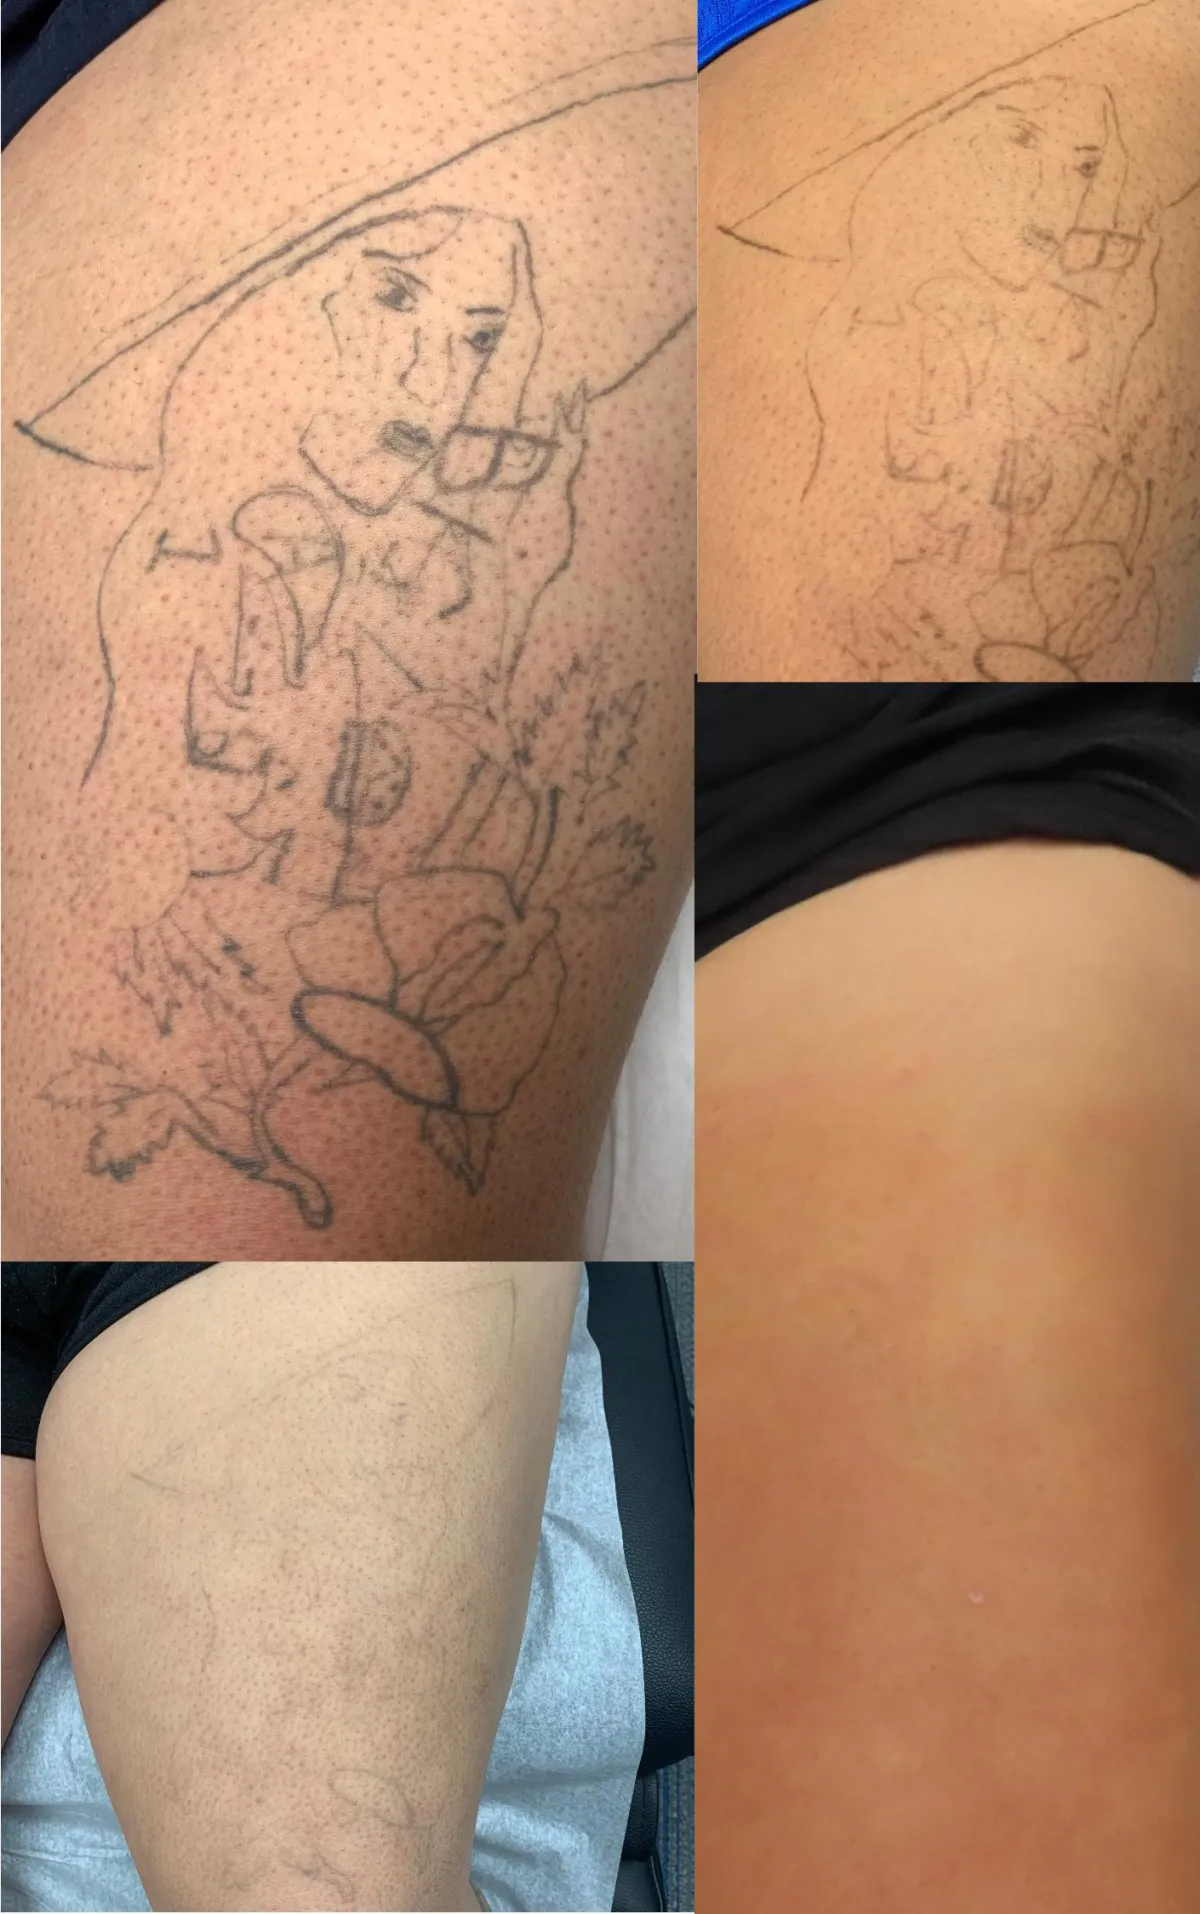 Tattoo Removal | Laser therapy, Tattoo removal, Laser tattoo removal